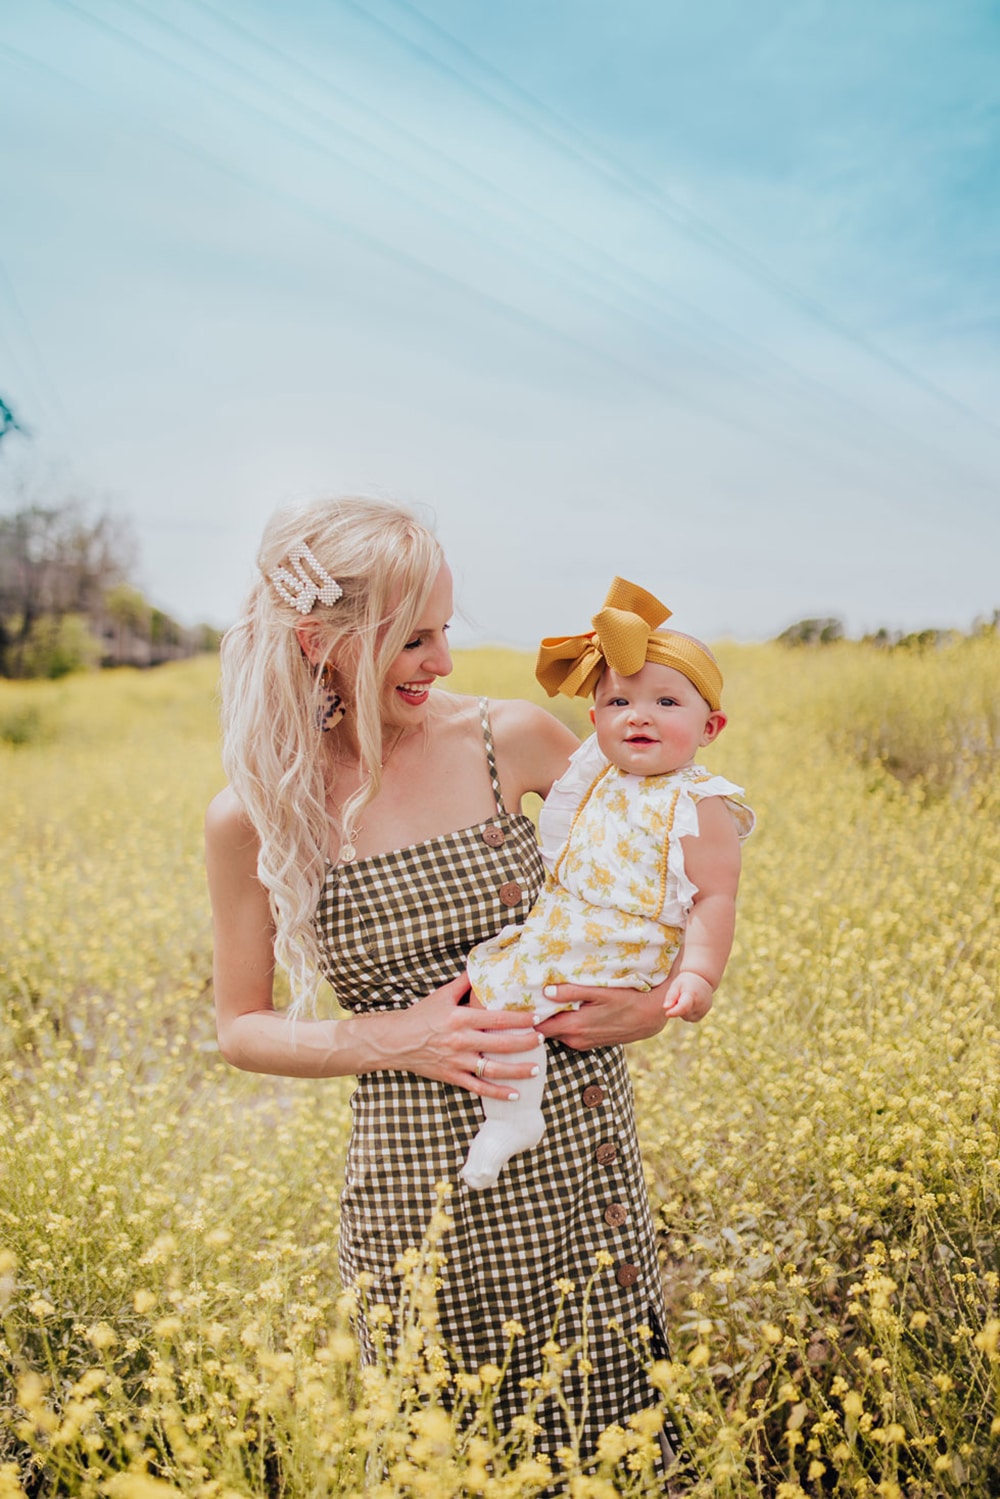 How to Pose for Photos: Tips for Moms -